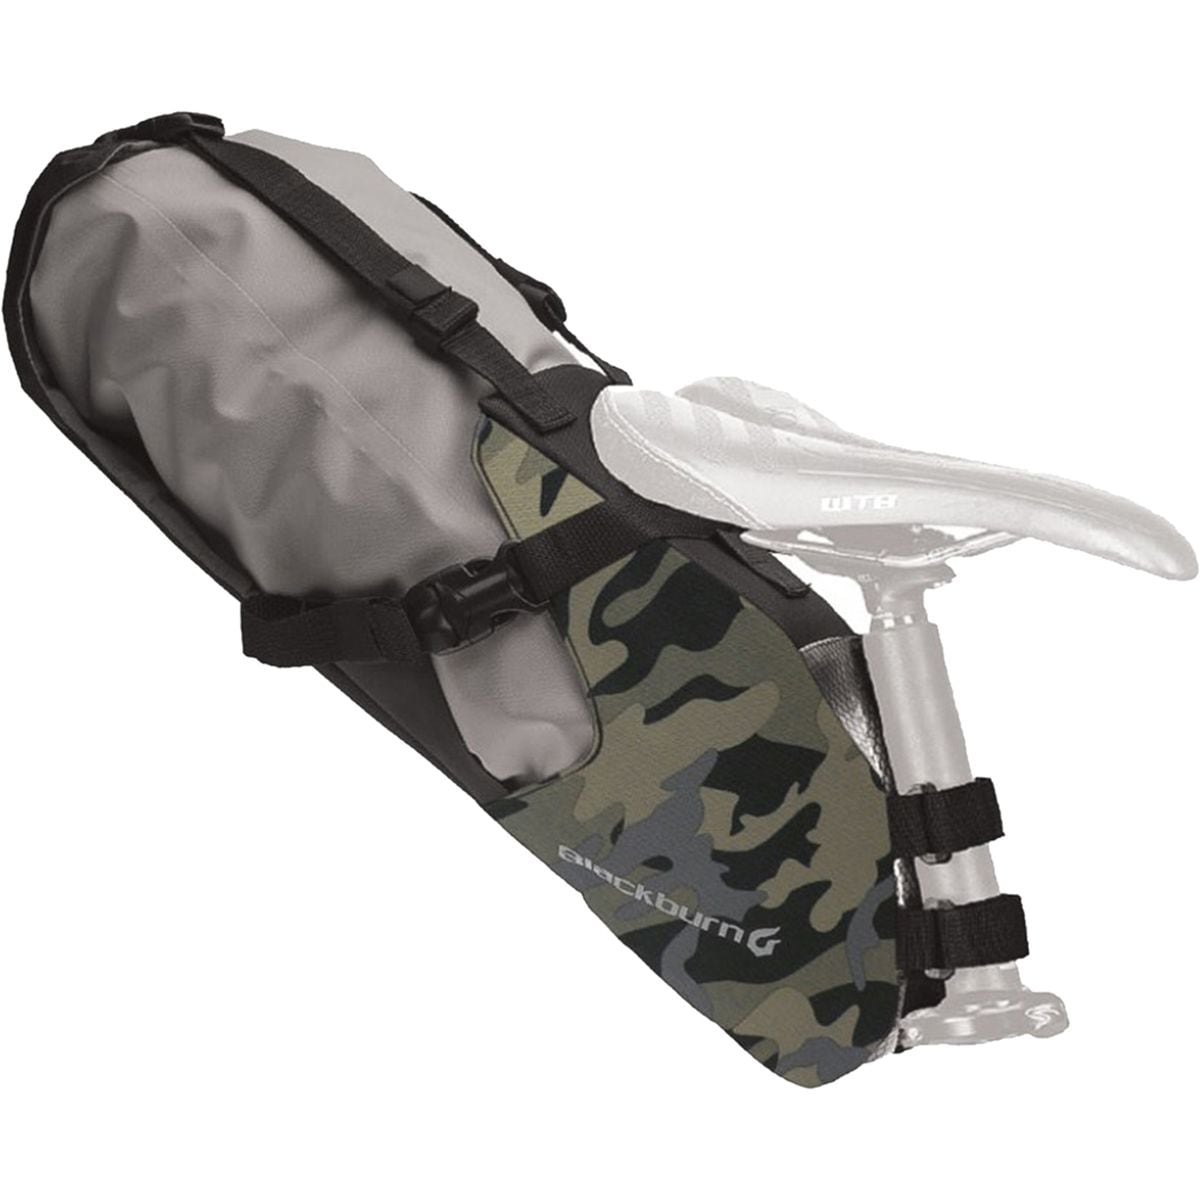 Outpost Seat Pack & Dry Bag